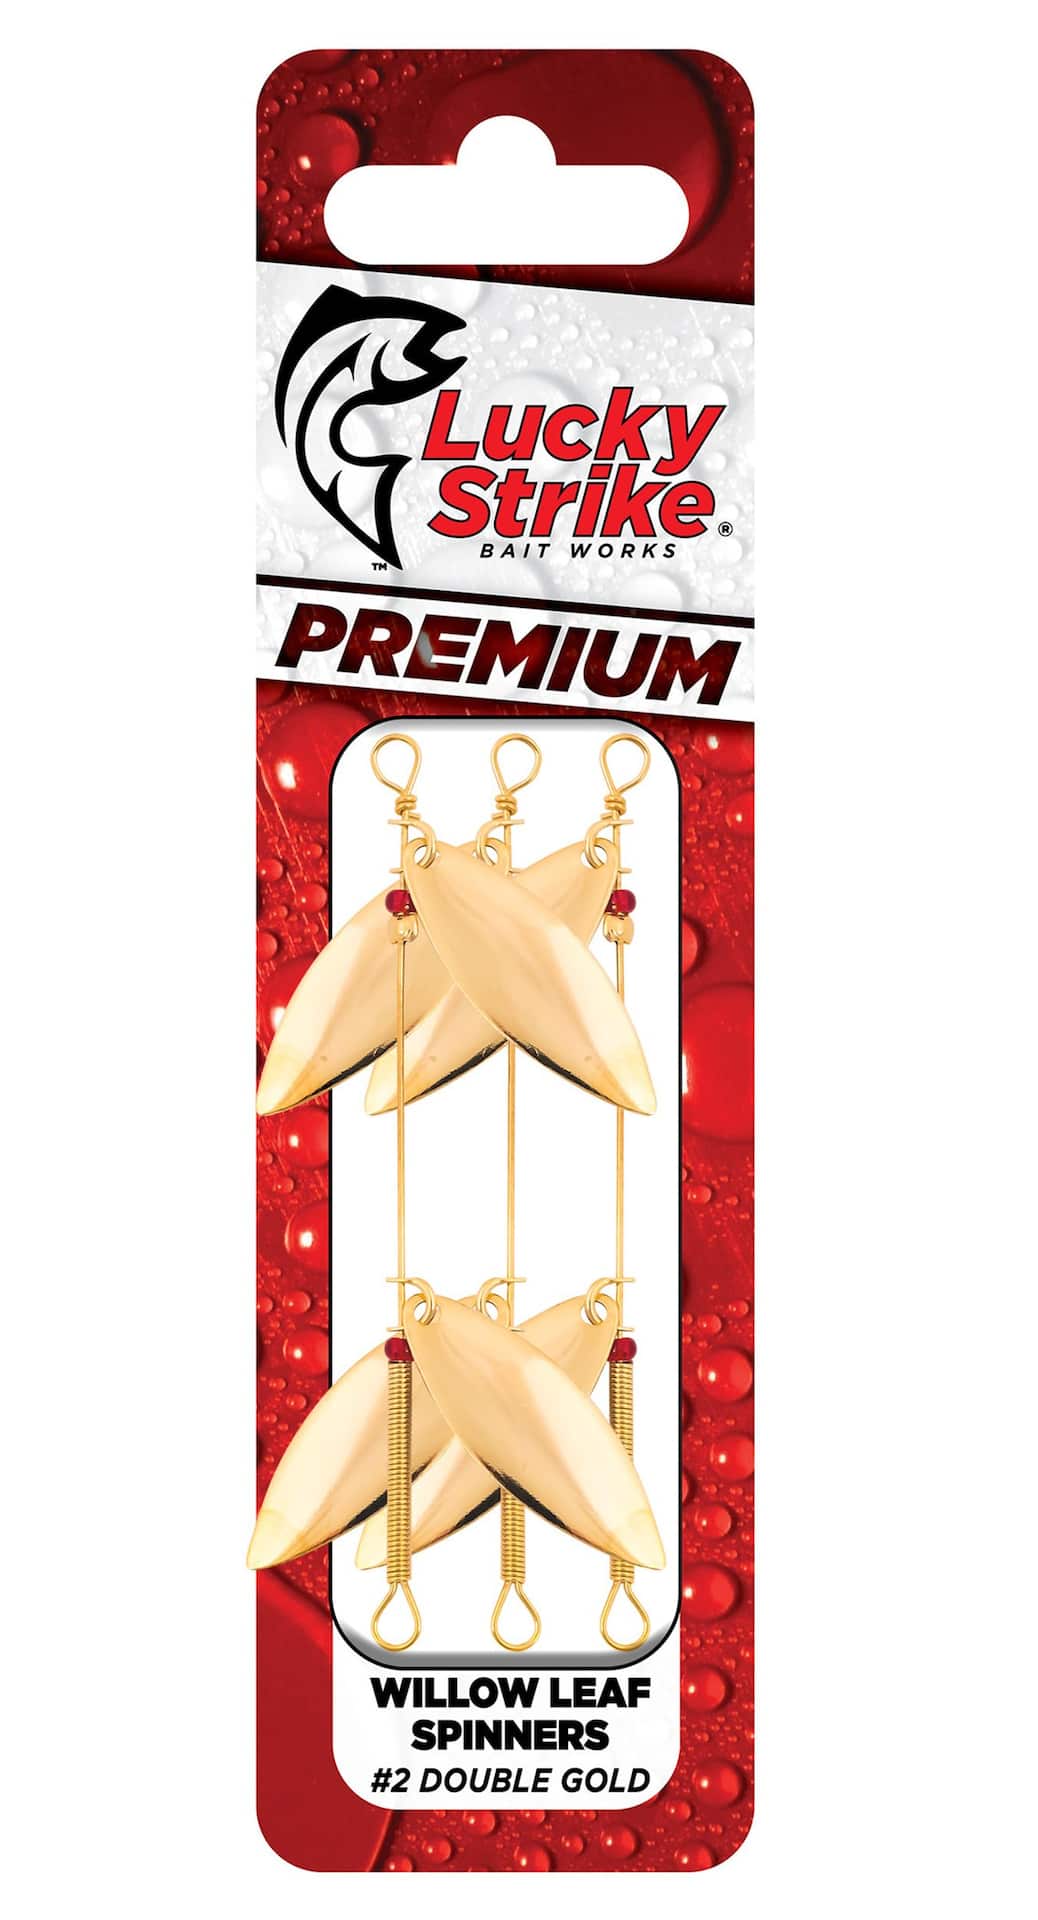 https://media-www.canadiantire.ca/product/playing/fishing/fishing-lures/0777682/lucky-strike-willow-leaf-spinner-double-gold-size-2-95e89c96-4873-4c20-bd5c-9a3c5924f635-jpgrendition.jpg